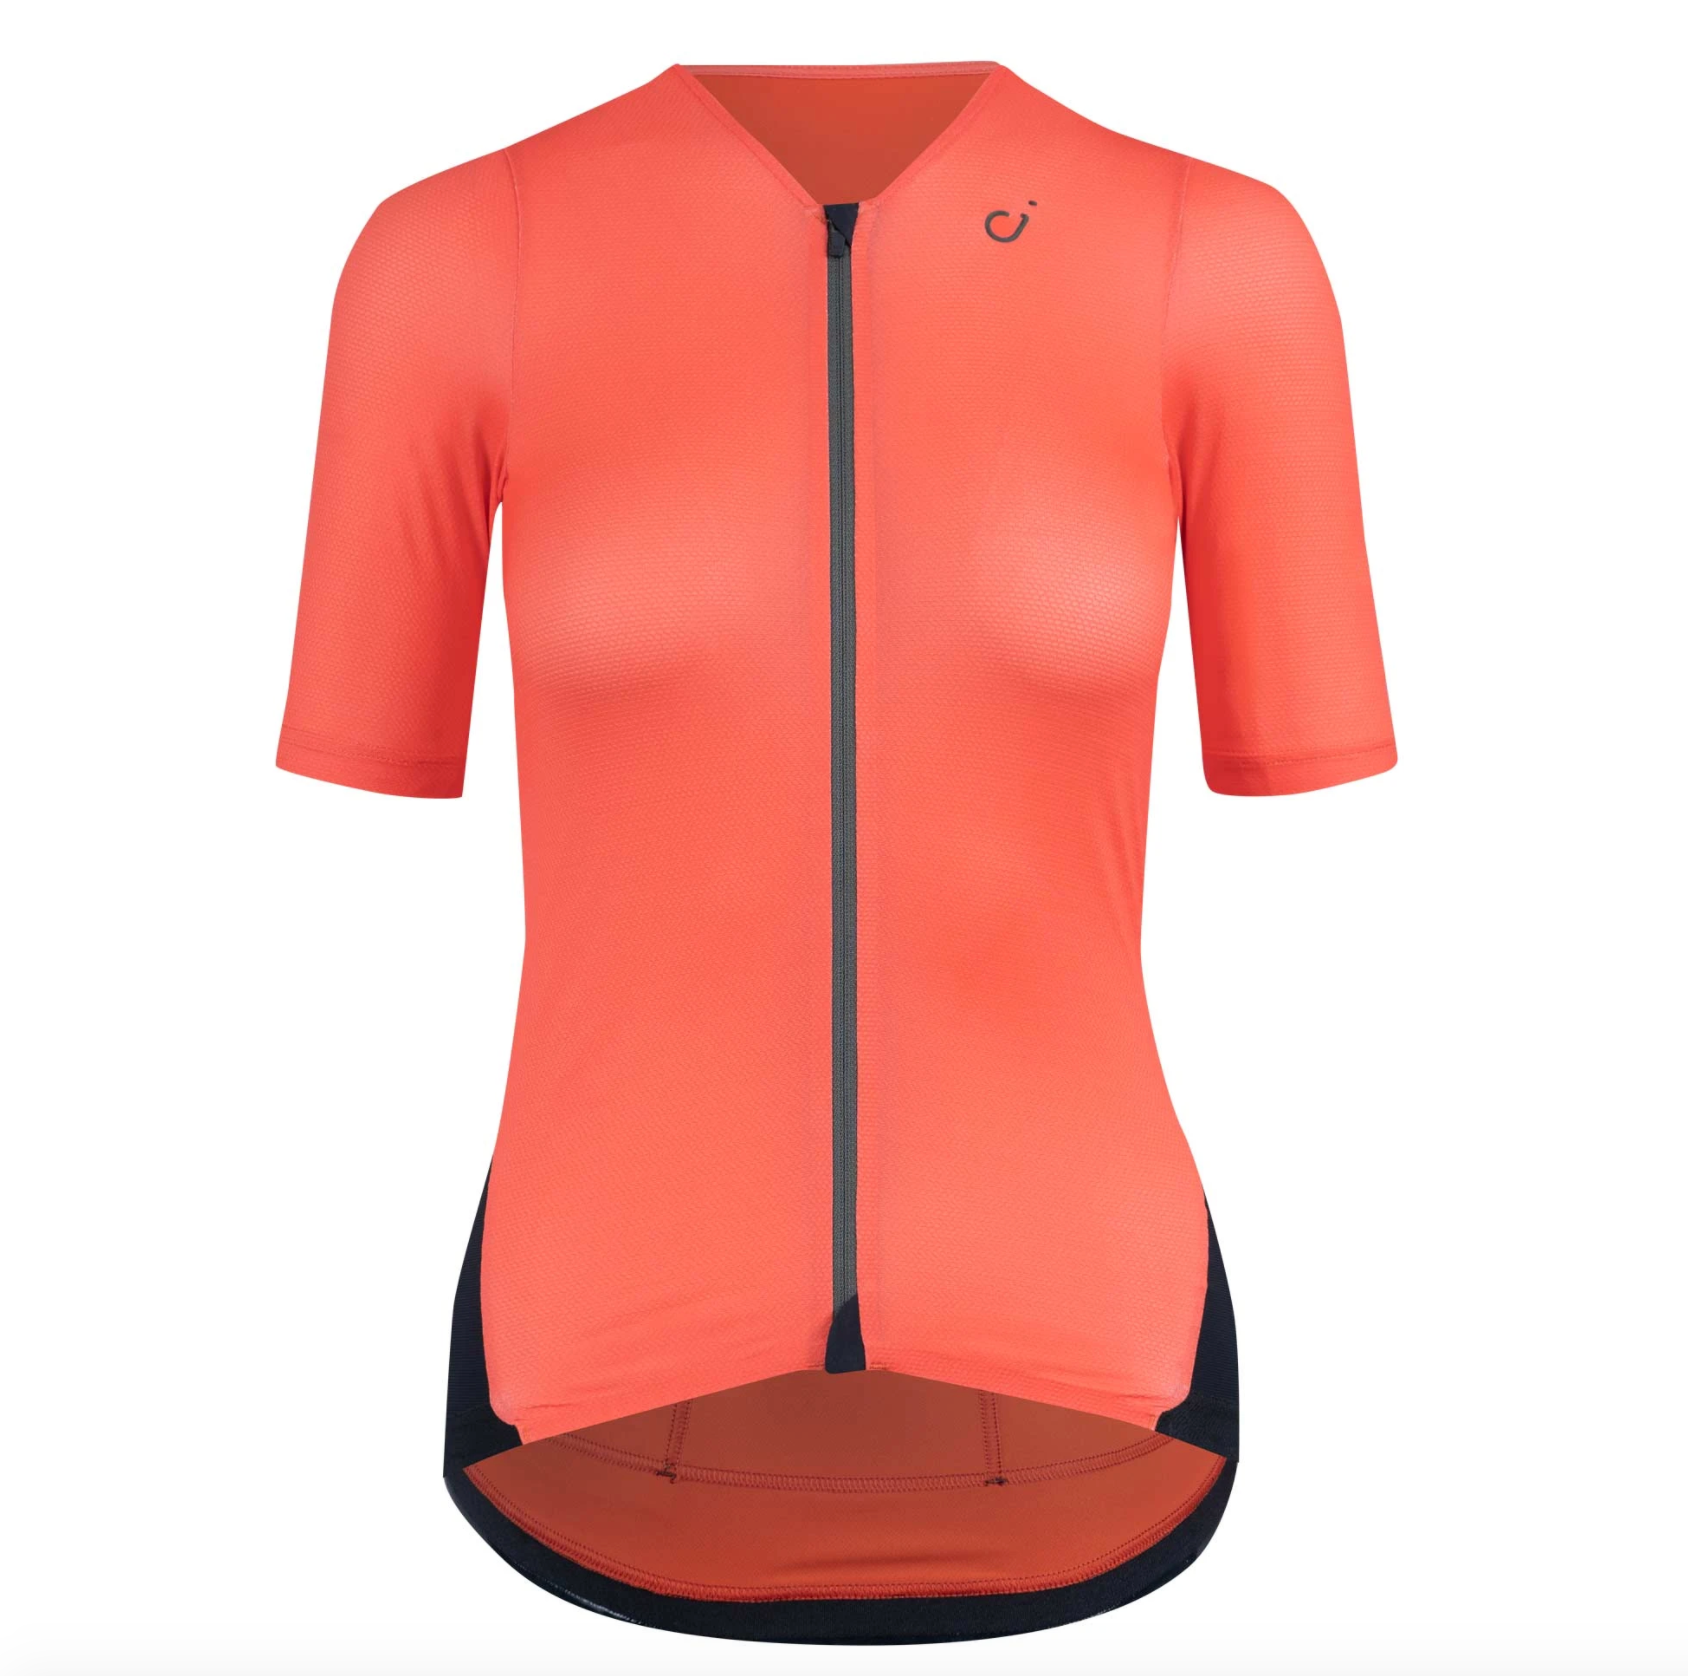 VELOCIO WOMENS JERSEY CONCEPT CORAL RED CYCLING SYDNEY AUSTRALIA BIKE SHOP